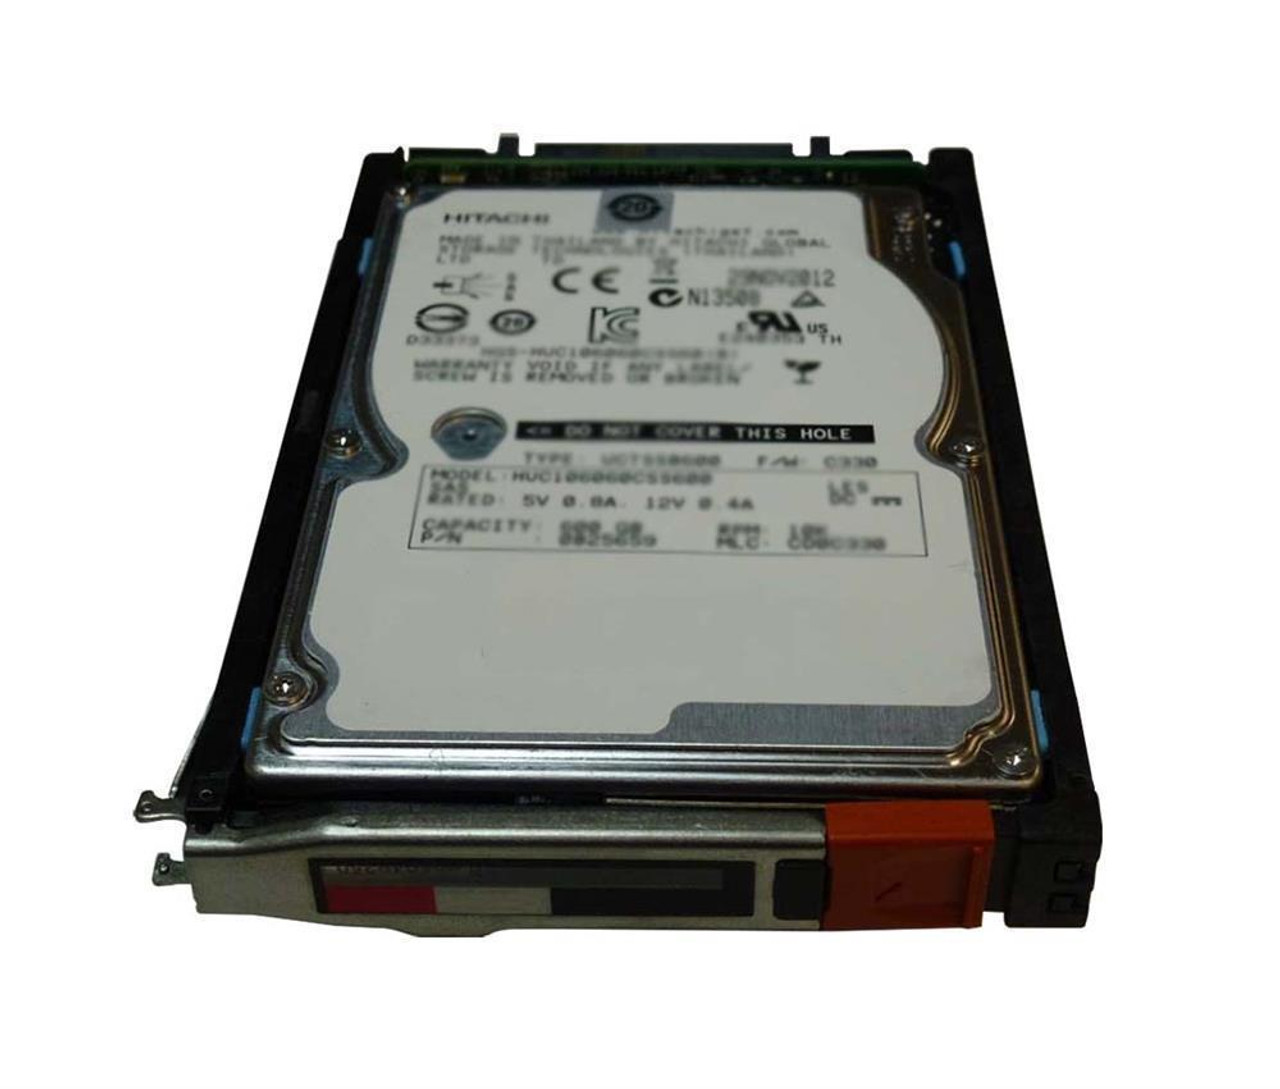 FLN42S6FX-200 EMC 200GB Fast Cache Flash 2.5-inch Internal Solid State Drive (SSD) for VNX 25 x 2.5 Enclosure